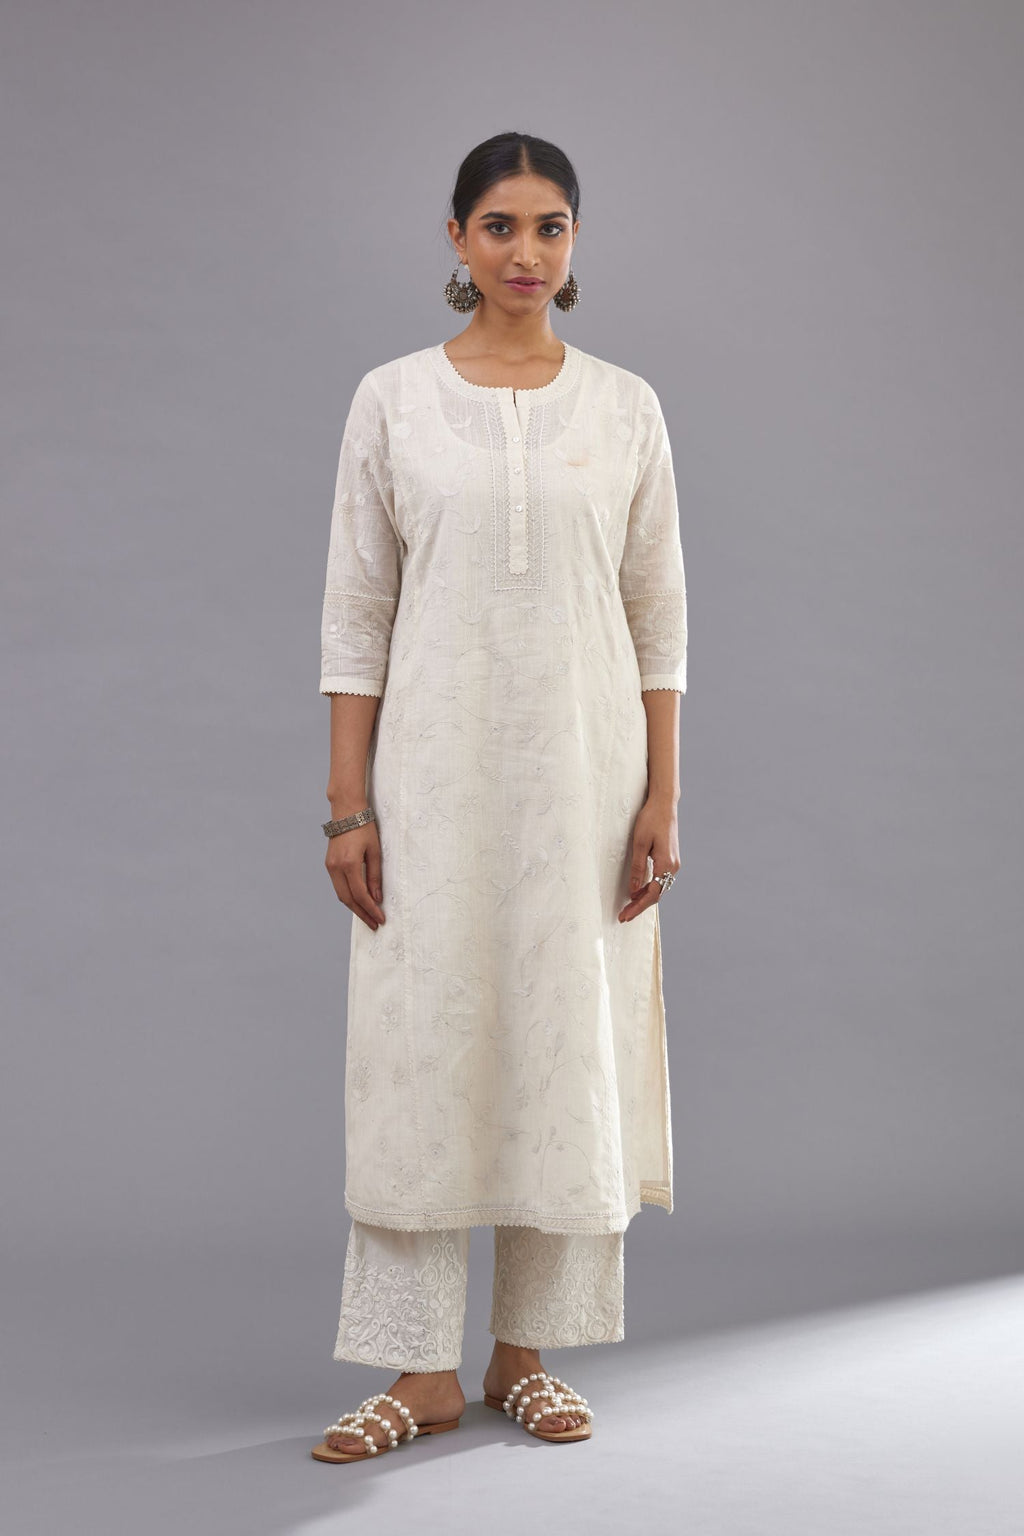 Off-white Handspun handwoven cotton kurta with all-over jaal embroidery and small assorted flowers embroidery at side panells, highlighted with sequins handwork.